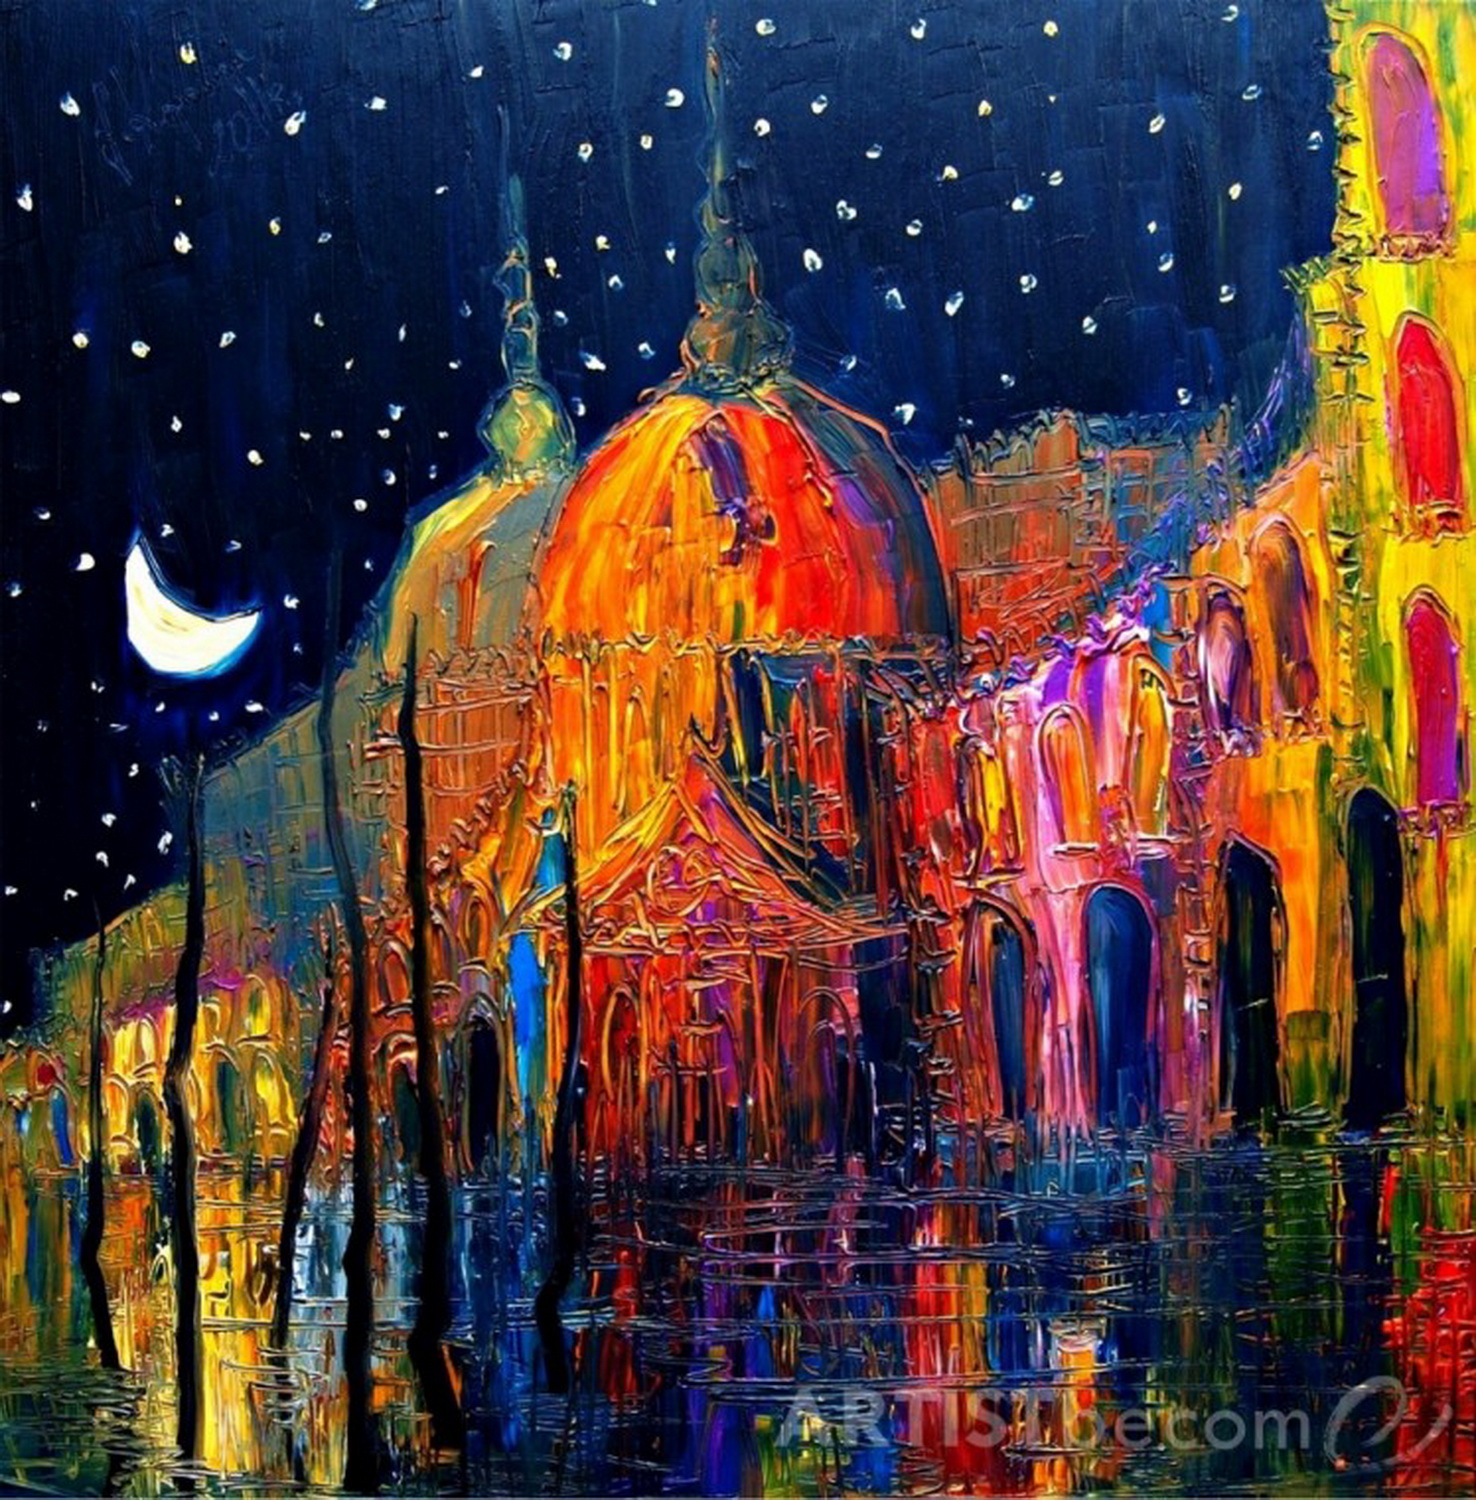 "Night" by Justyna Kopania was named Artist Become's most popular contemporary art piece in 2012.